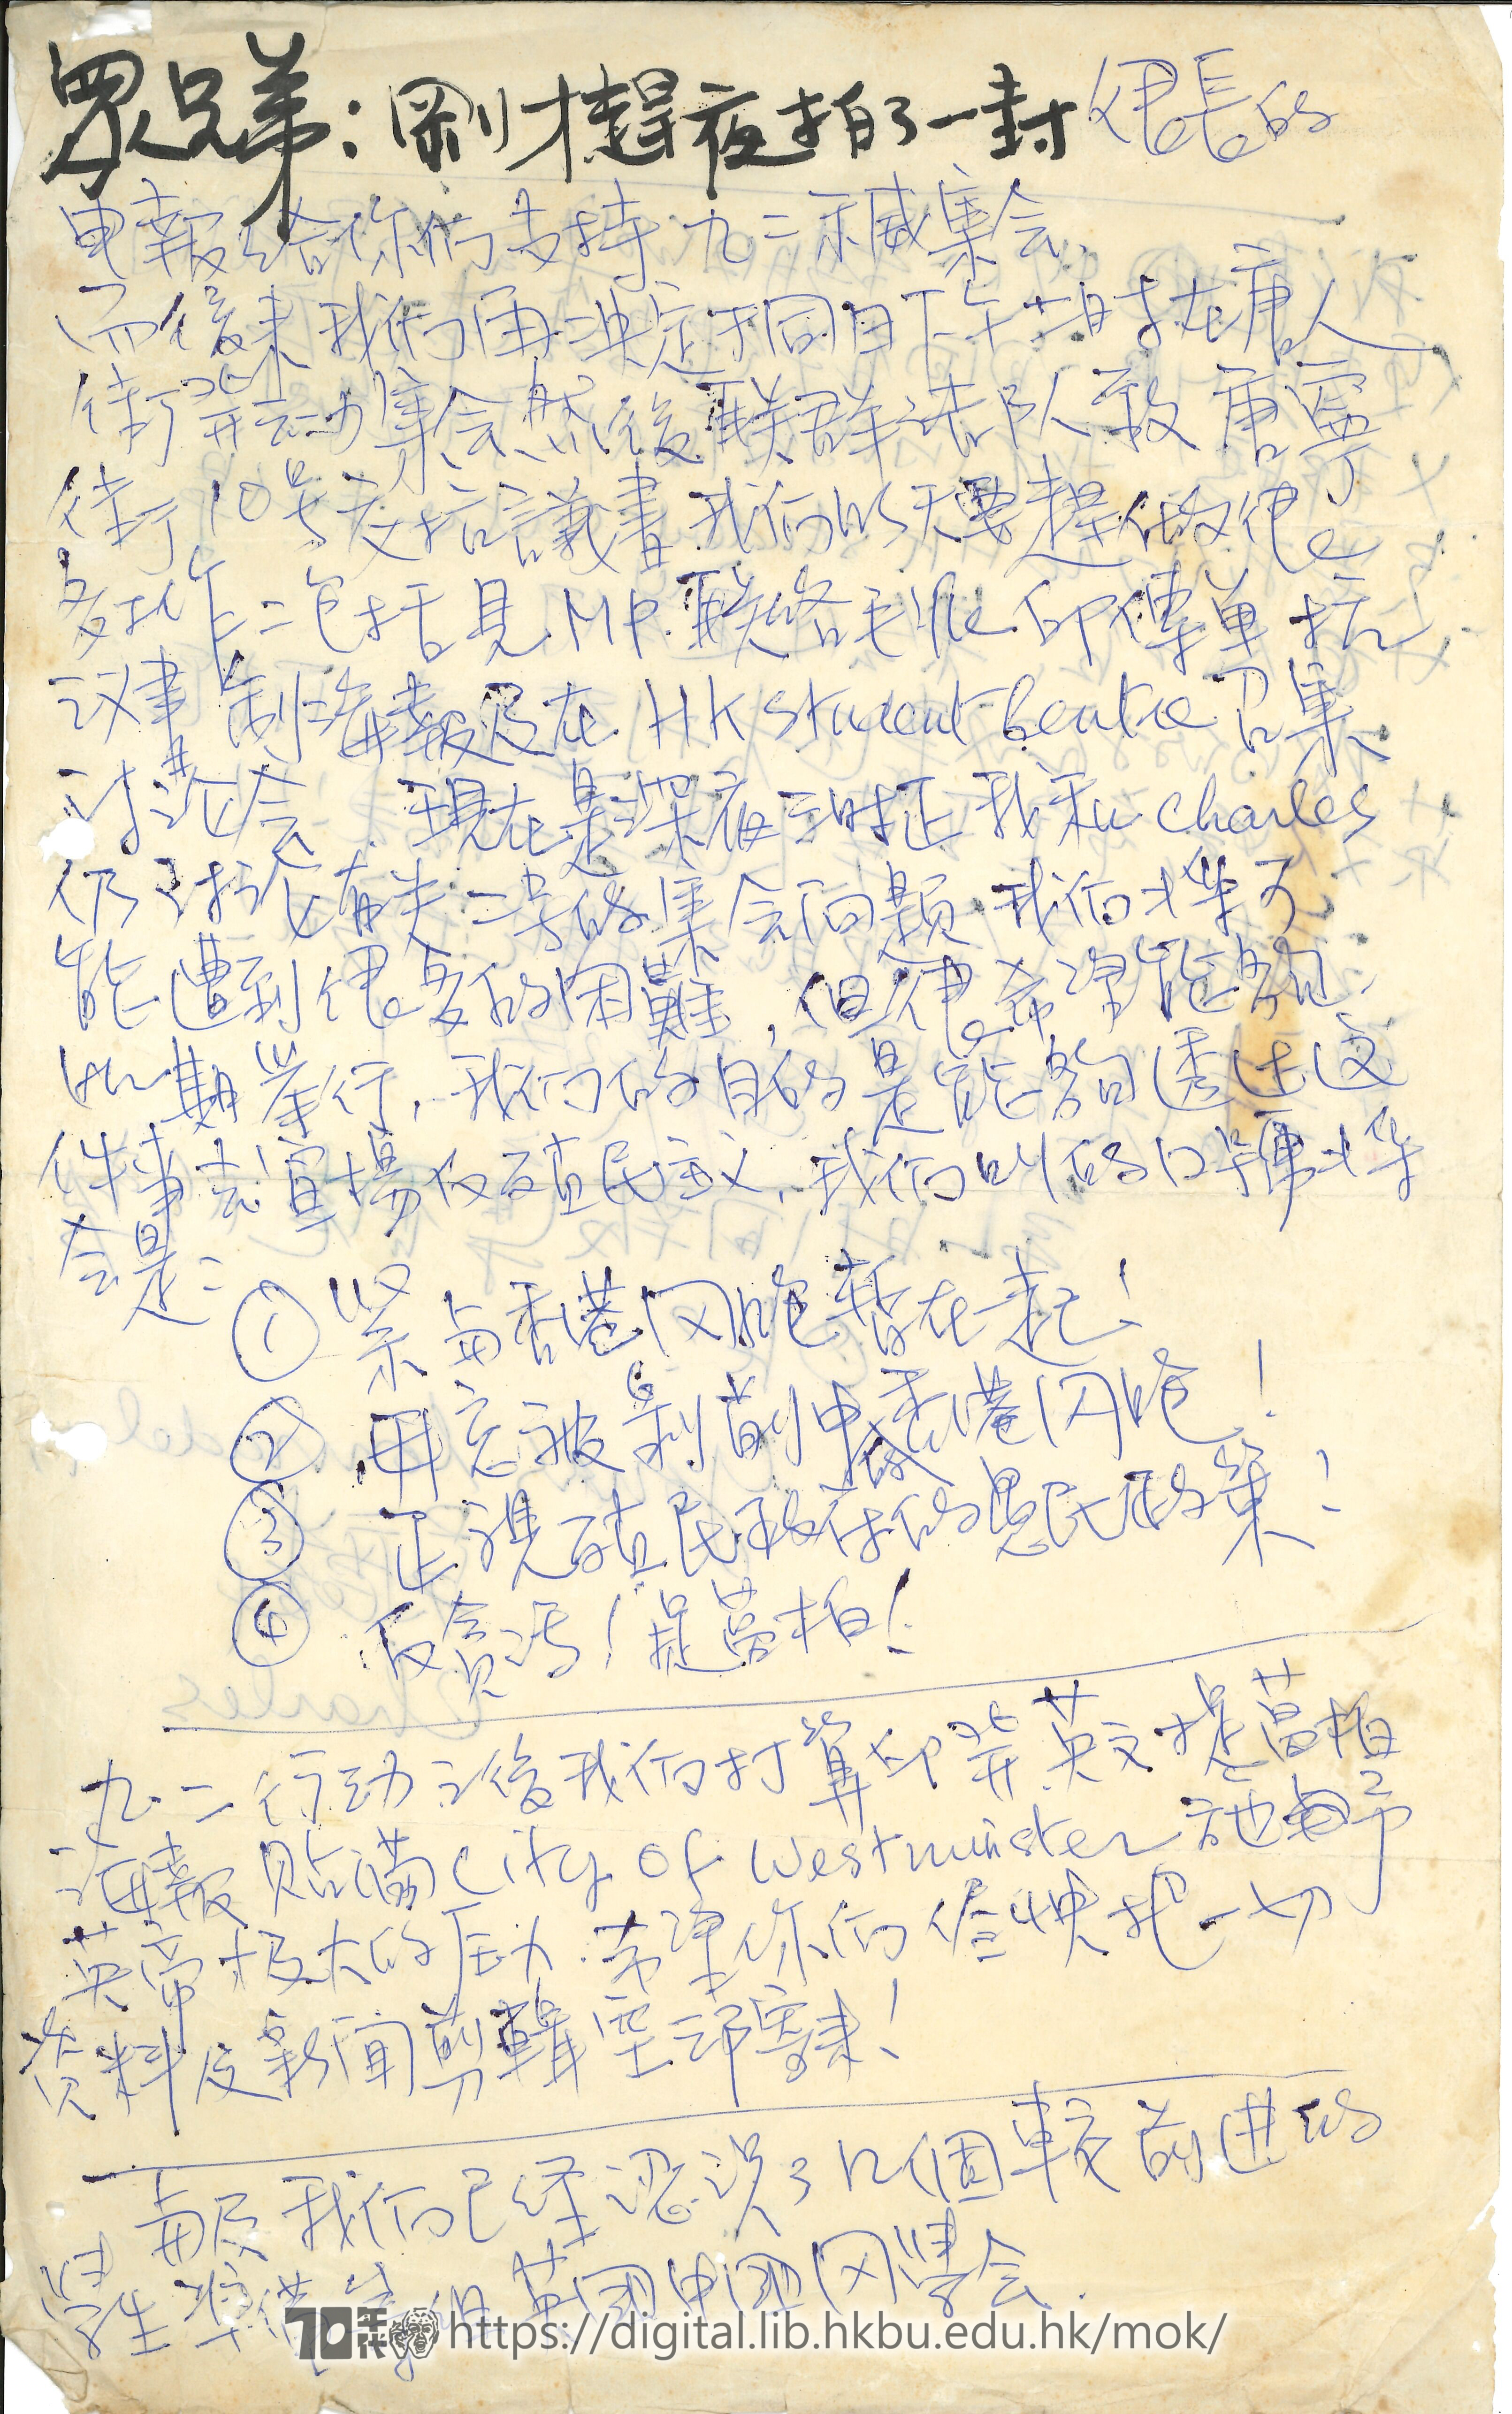   Letter from Ng Ka-lun  